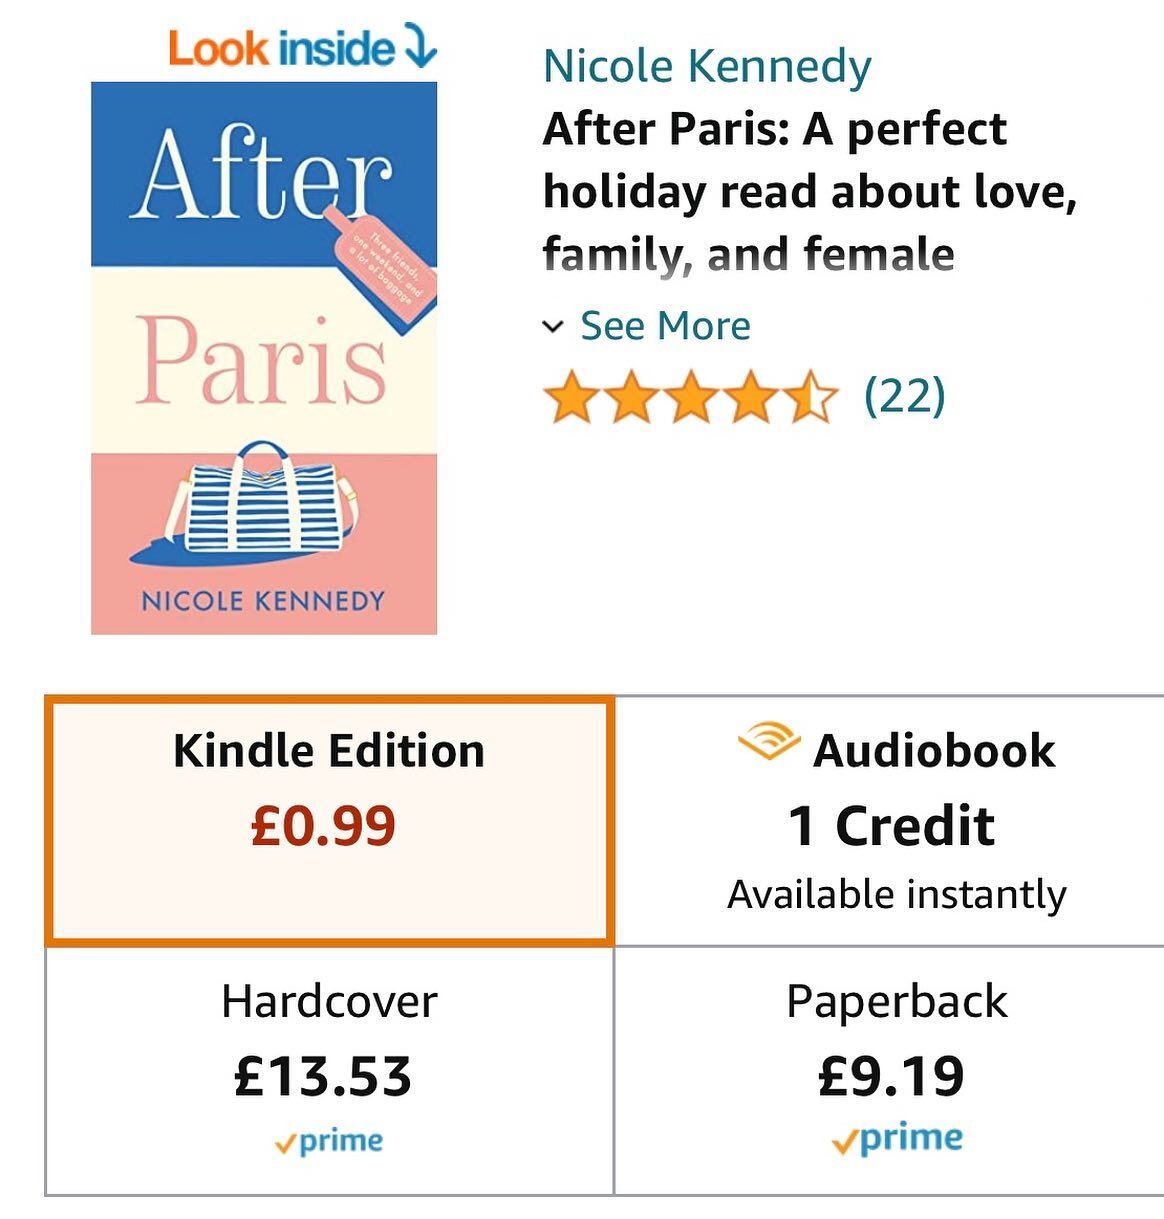 Reviews are slowly creeping up for #AfterParis ❤️ Please do review if you&rsquo;ve enjoyed. It helps other readers find the book (&amp; quells my writerly self-doubt 😆)